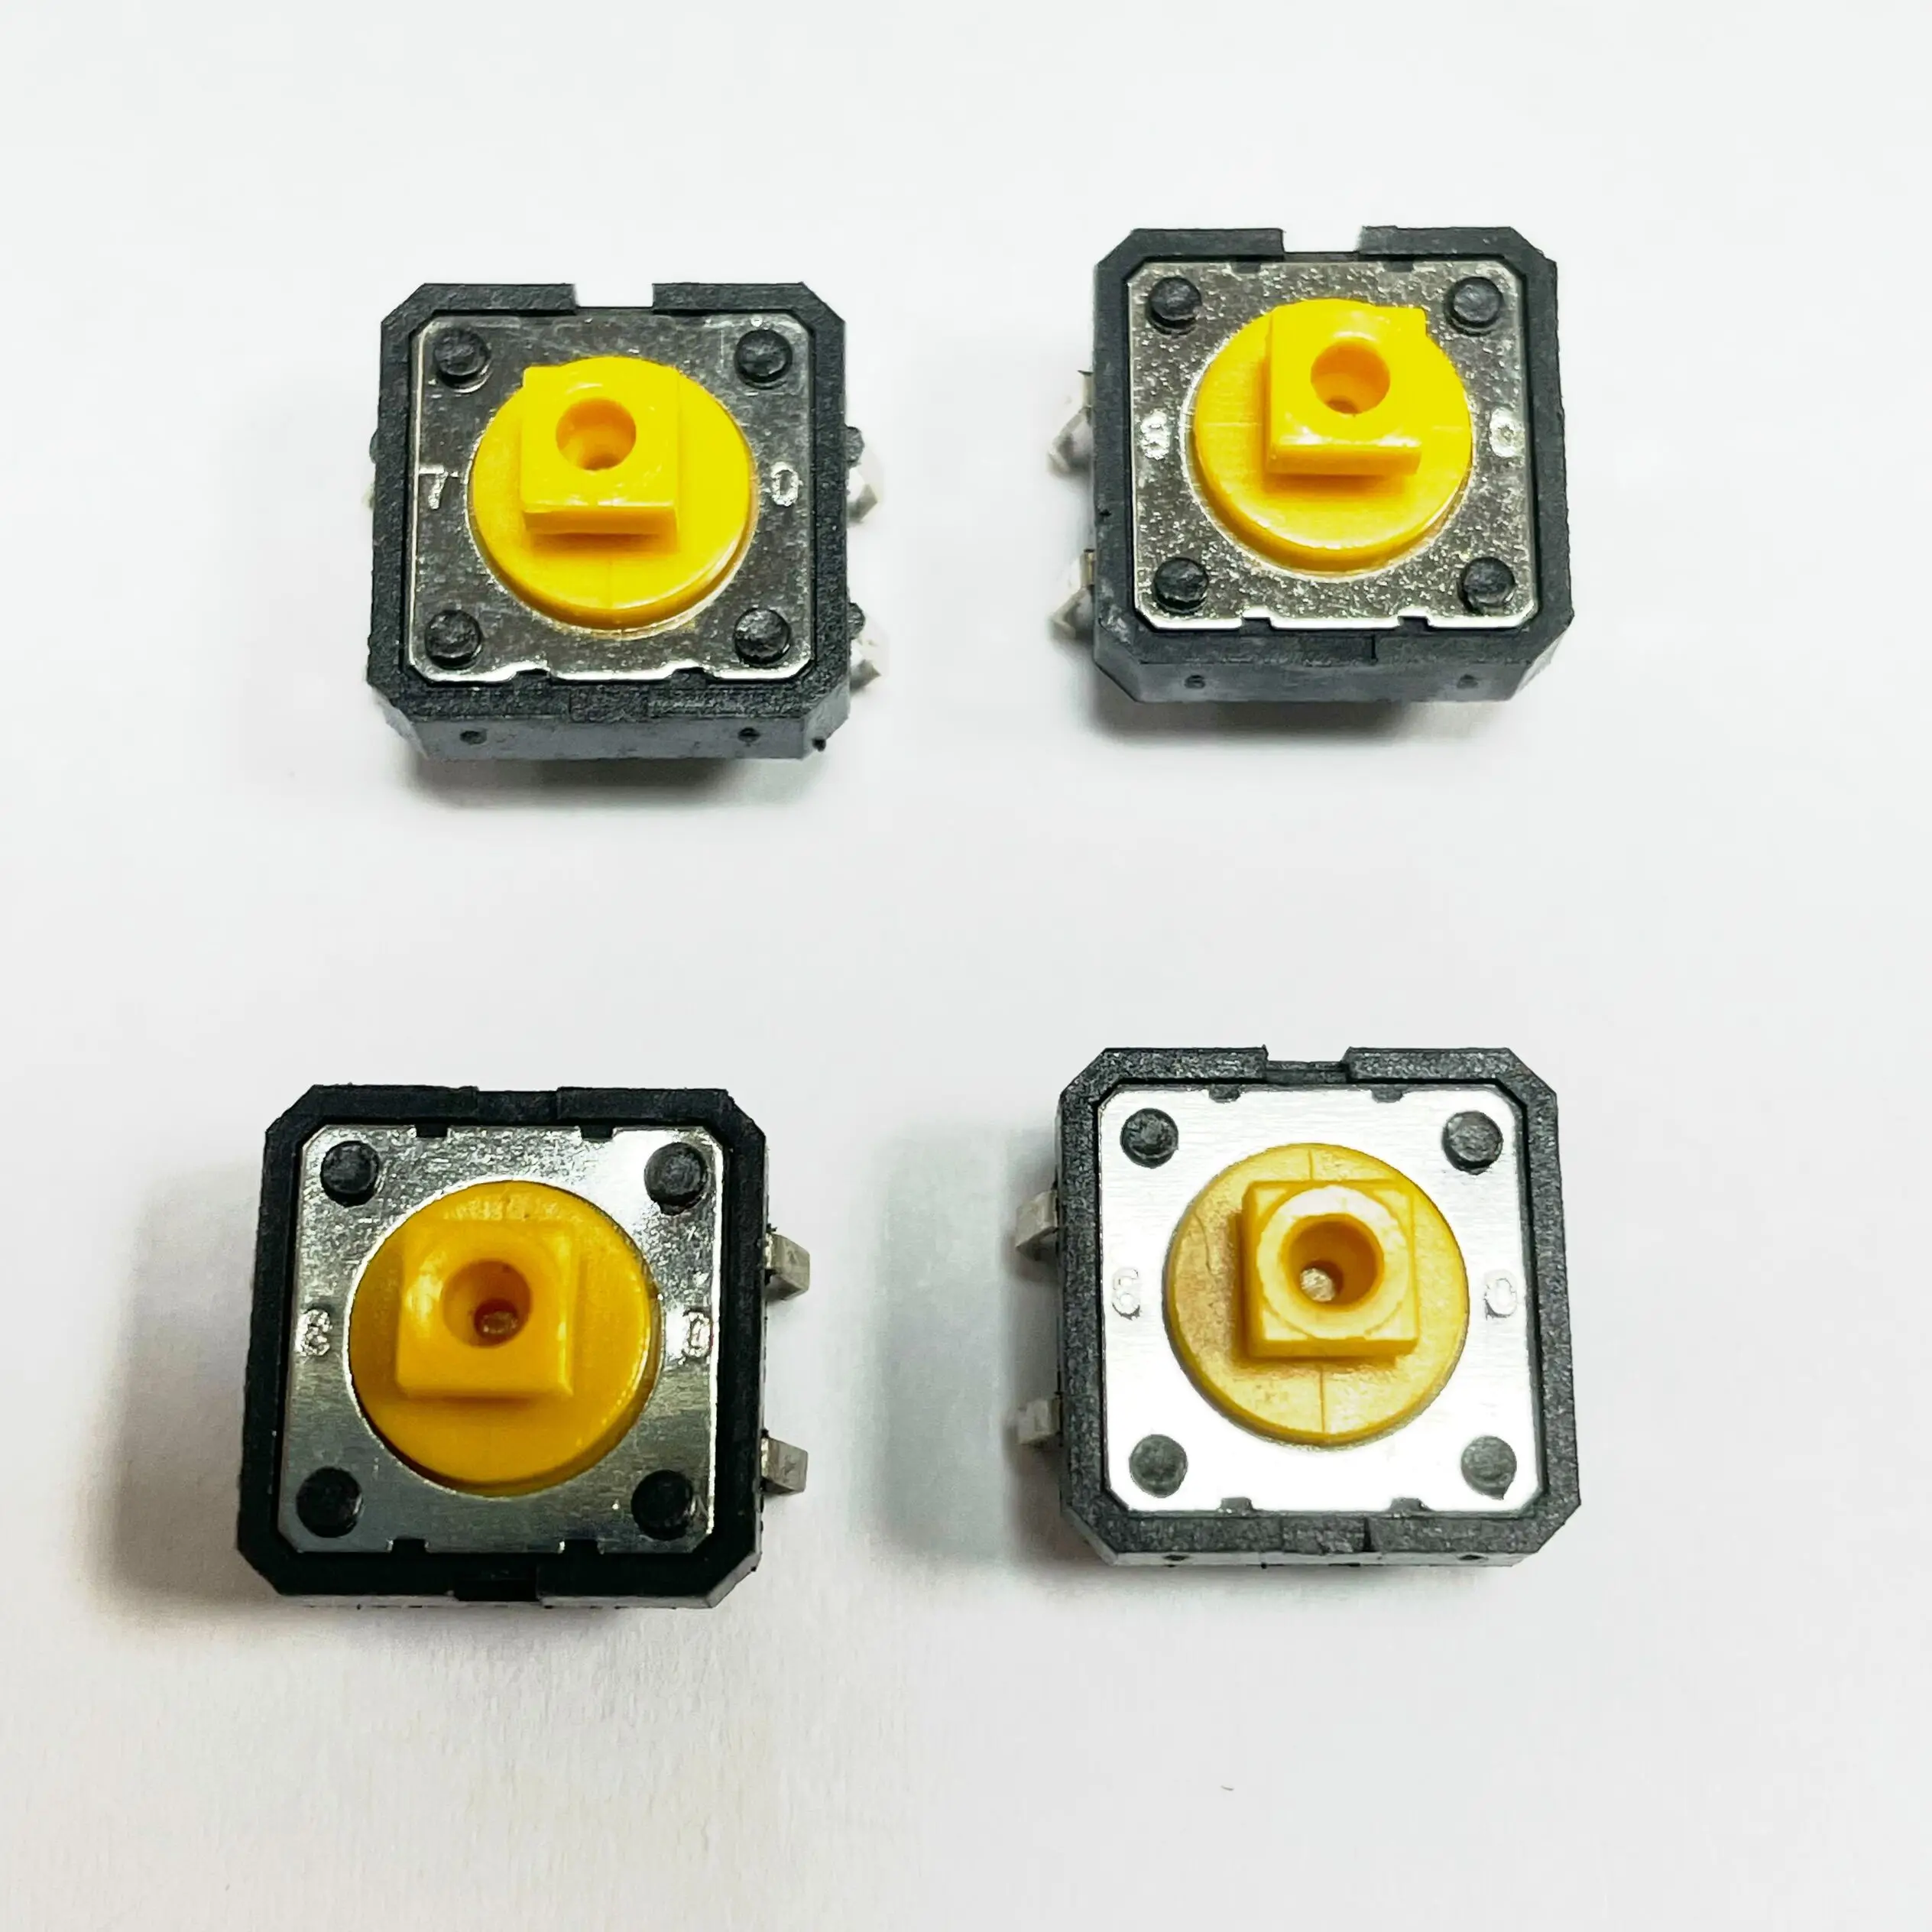 5PCS/LOT B3F-4055 12x12x7.3 mm Tactile Switches Yellow Square Push Button Tact Switch 12*12*7.3 mm Micro switch 3 2 4 9 2 5 micro switch for toyota tactile push button car remote control key button switches